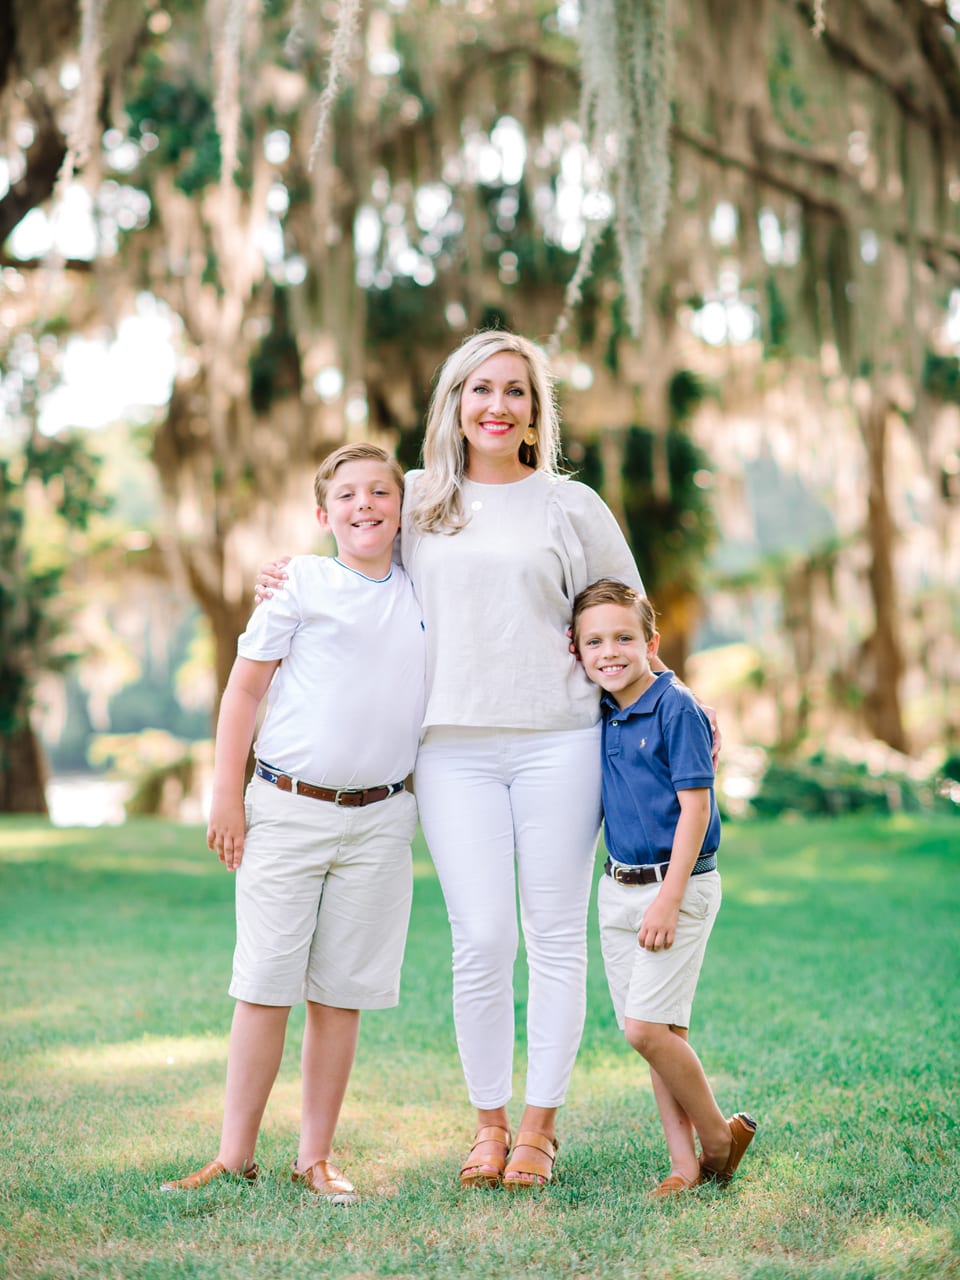 Wachesaw Plantation Family Photographer - Family Session at Wachesaw Plantation near Pawleys Island - Cute Family Pictures Ideas